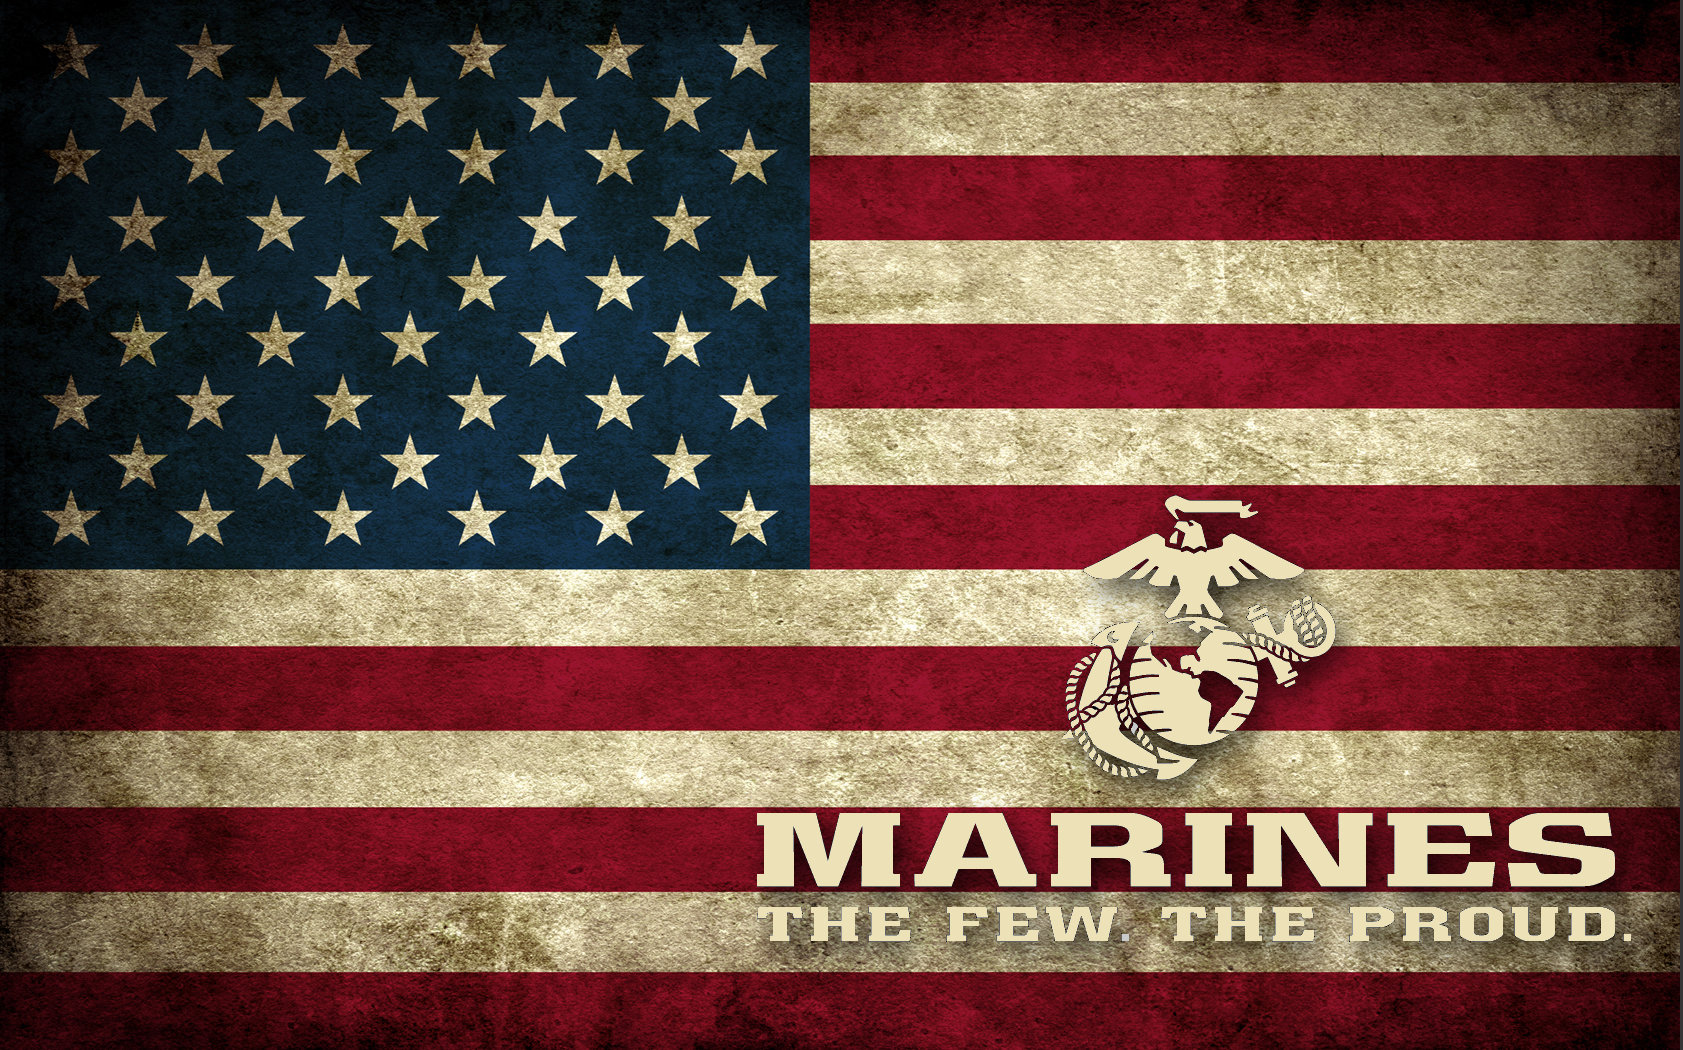 History And Tradition Are A Big Part Of The Marine Corps Brand